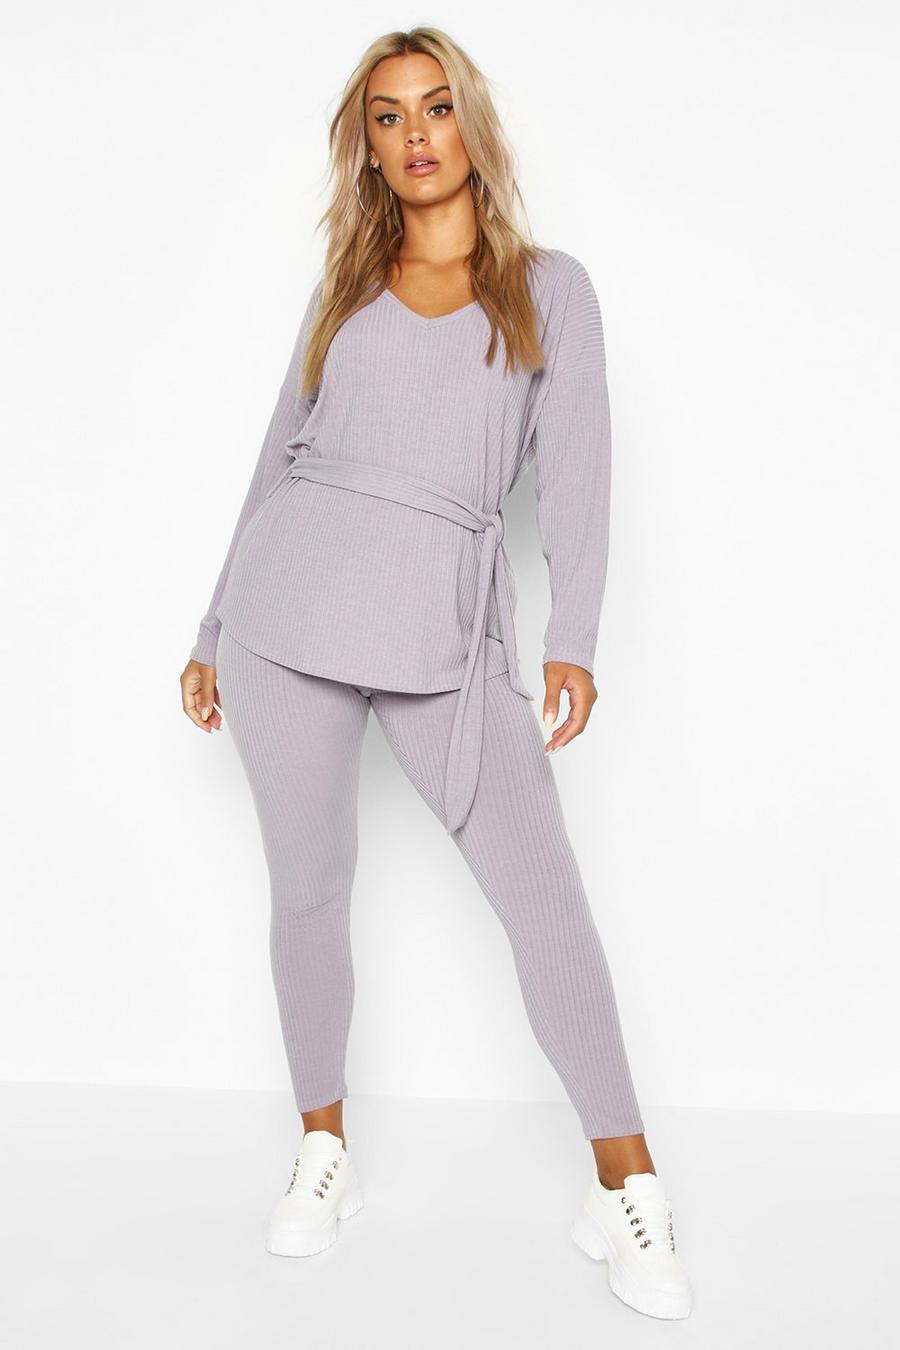 Grey Plus Soft Rib Top And Legging Two-Piece